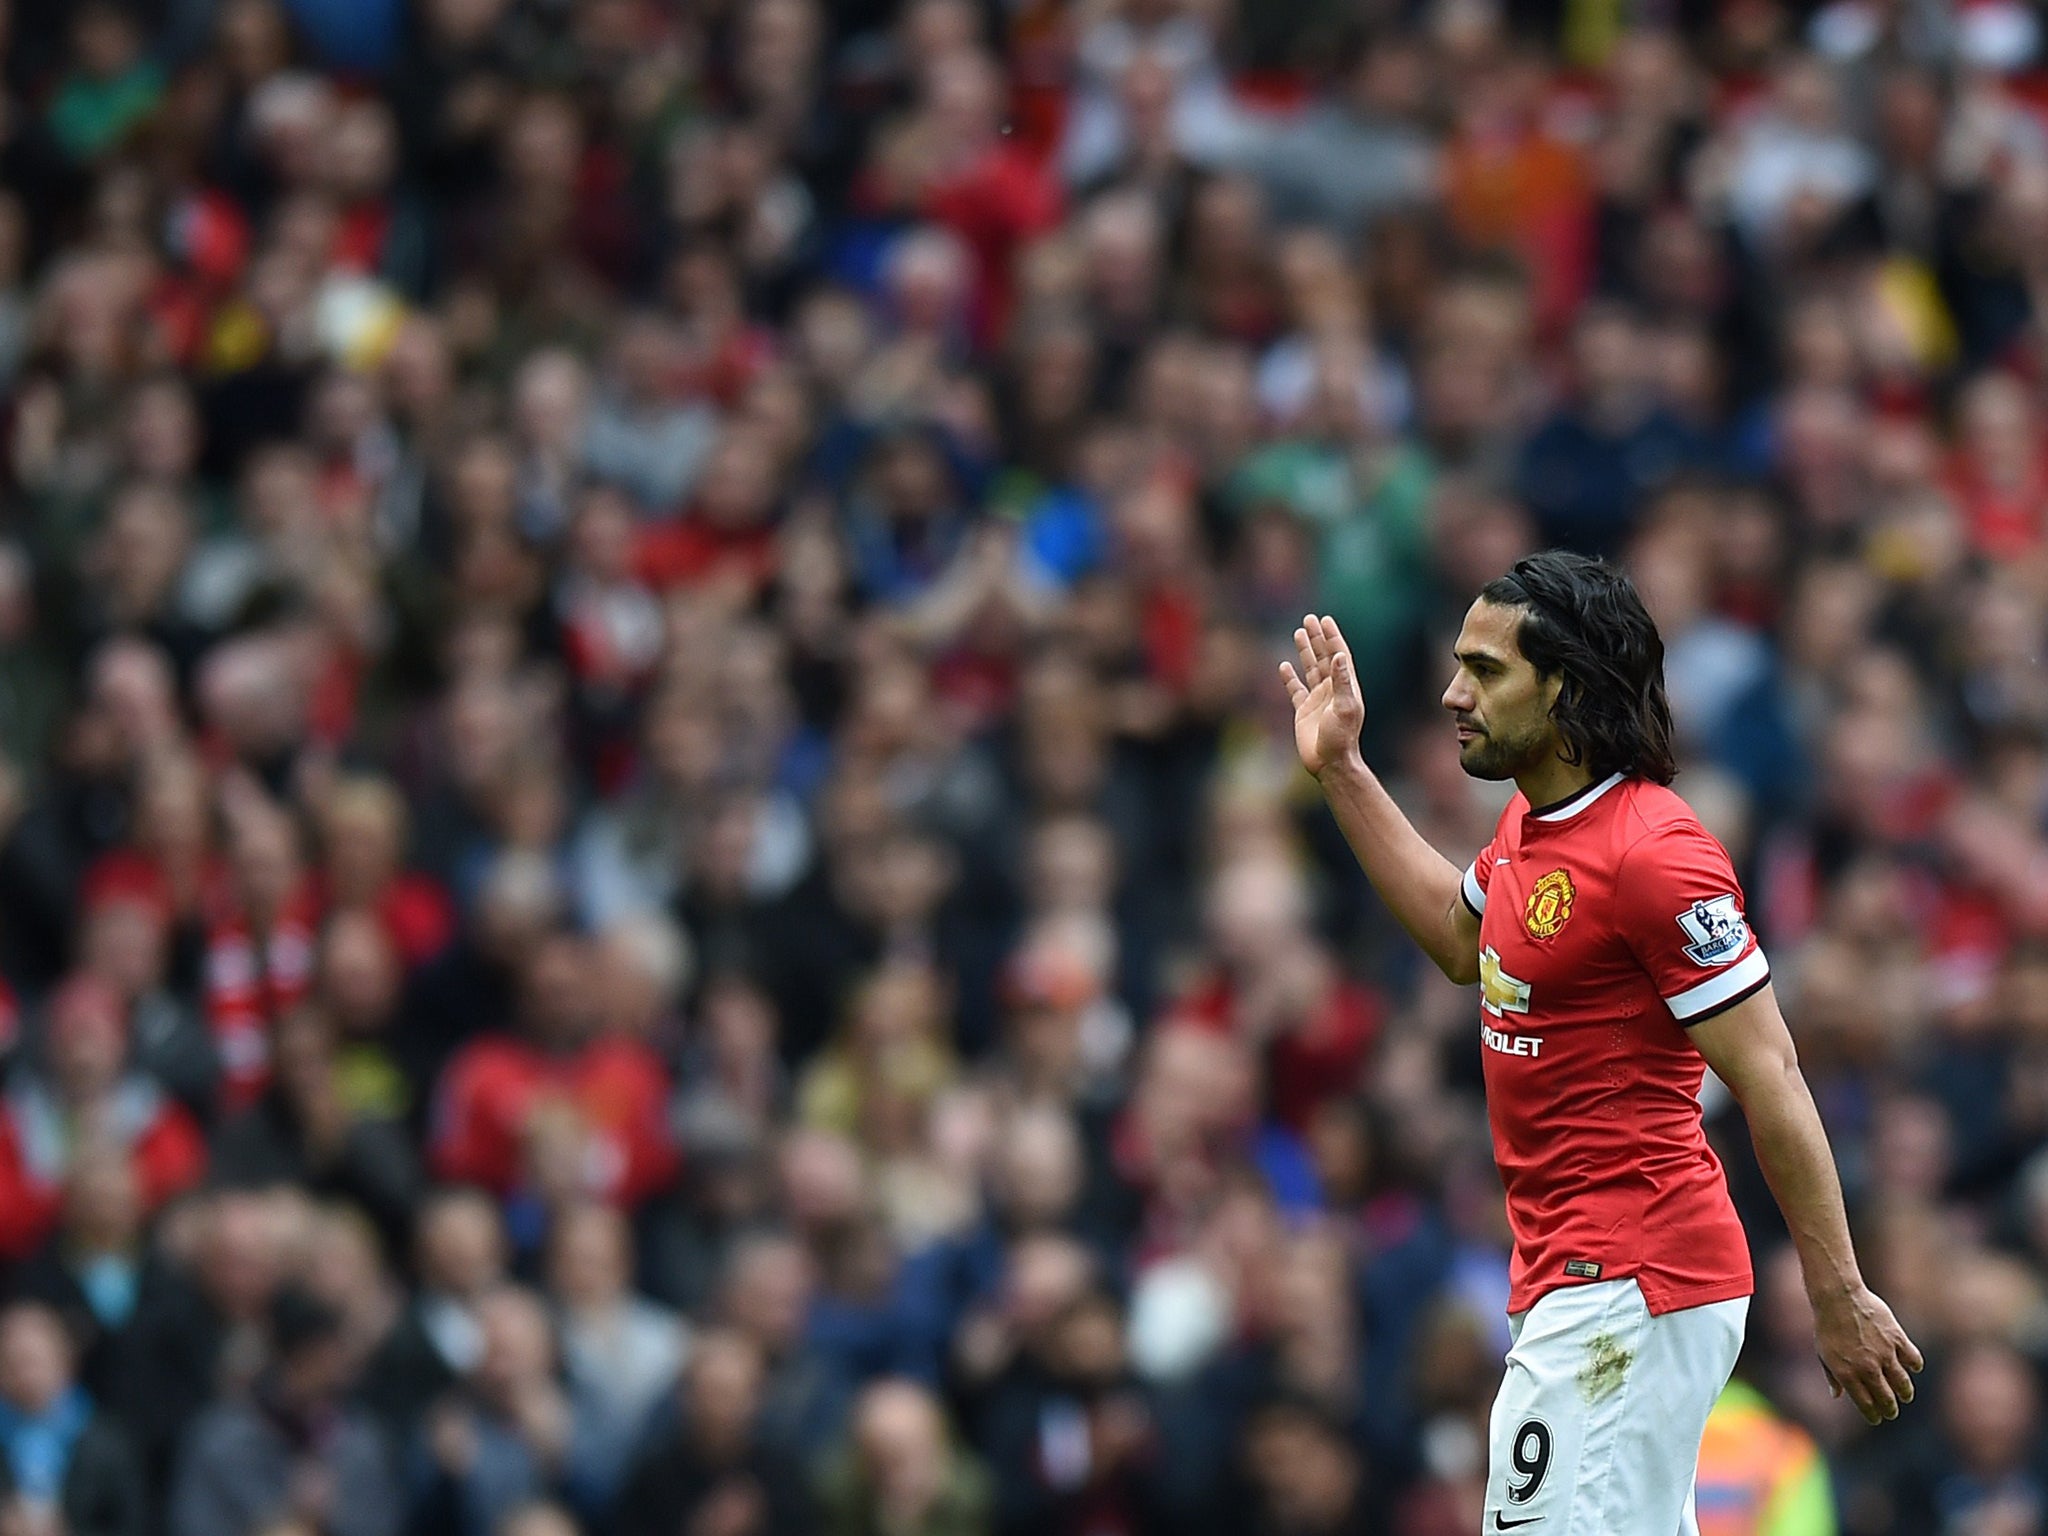 Radamel Falcao waves goodbye to the Manchester United fans